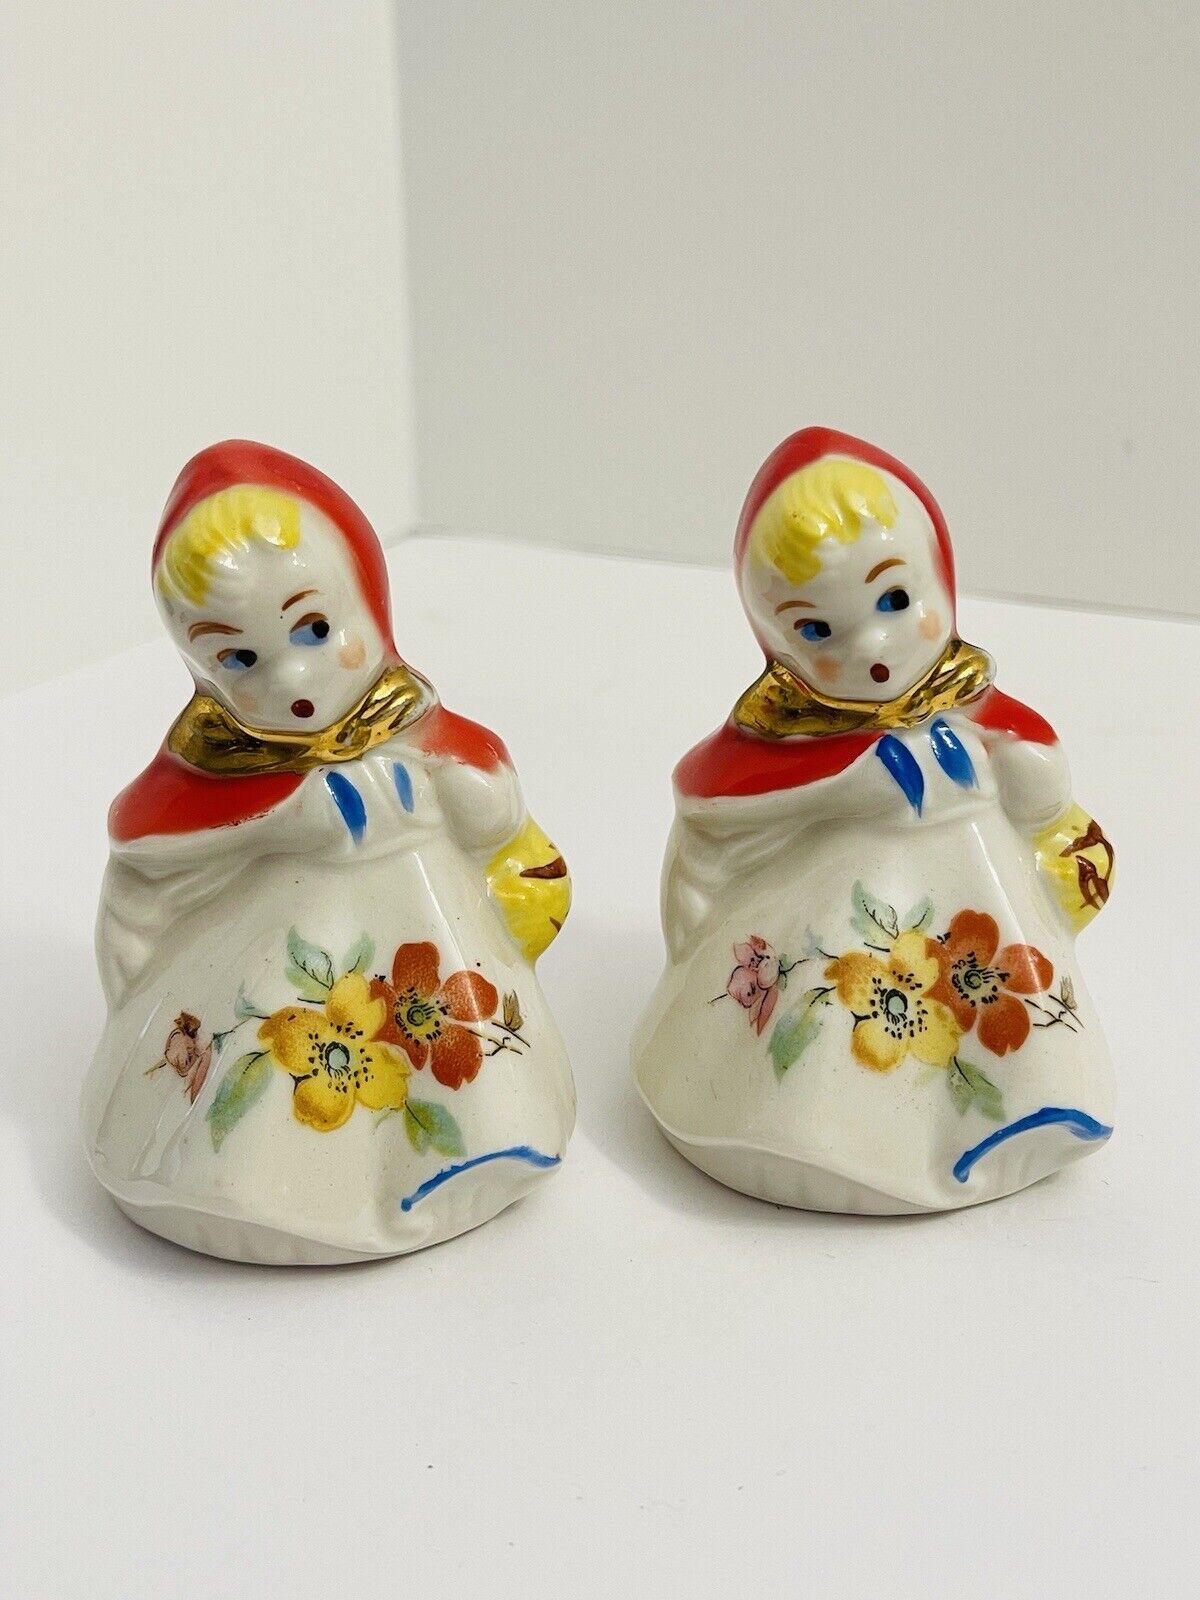 DARLING VINTAGE LITTLE RED RIDING HOOD LARGE SALT & PEPPER SHAKERS HULL POTTERY